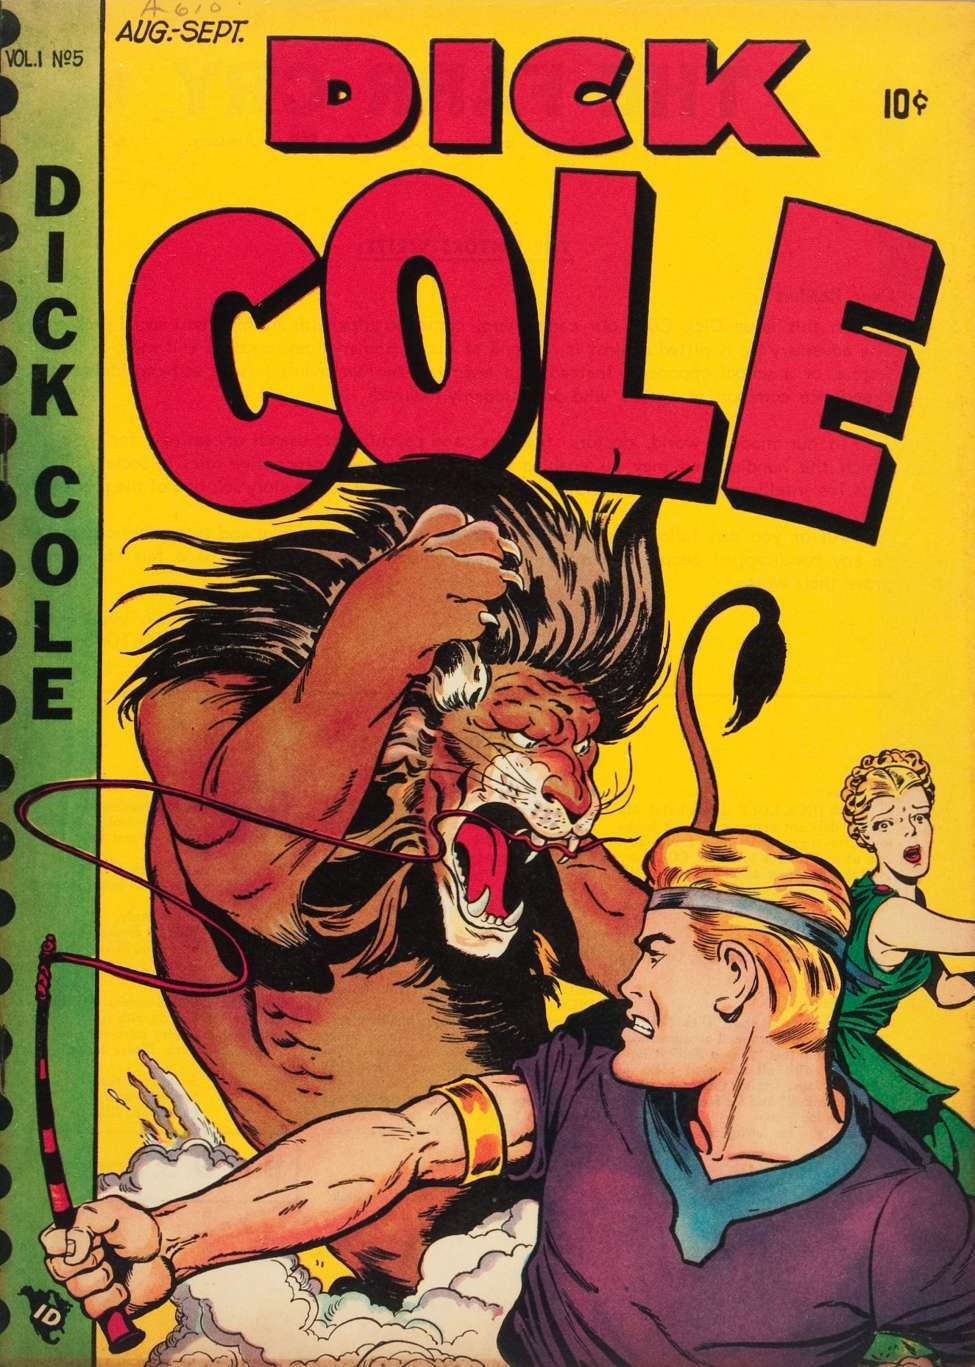 Book Cover For Dick Cole 5 - Version 2